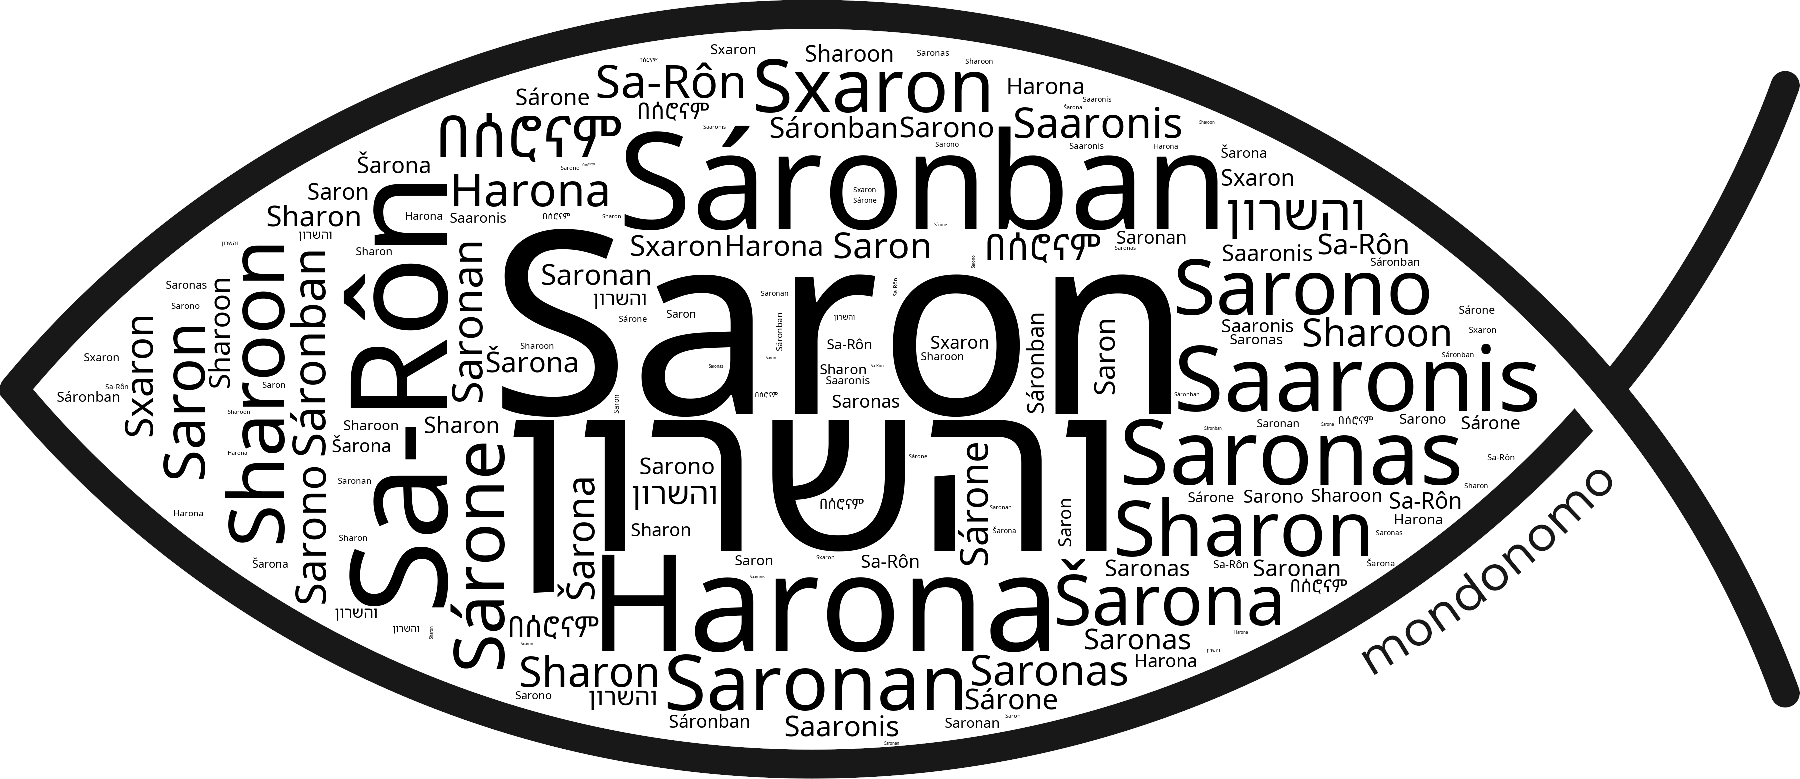 Name Saron in the world's Bibles